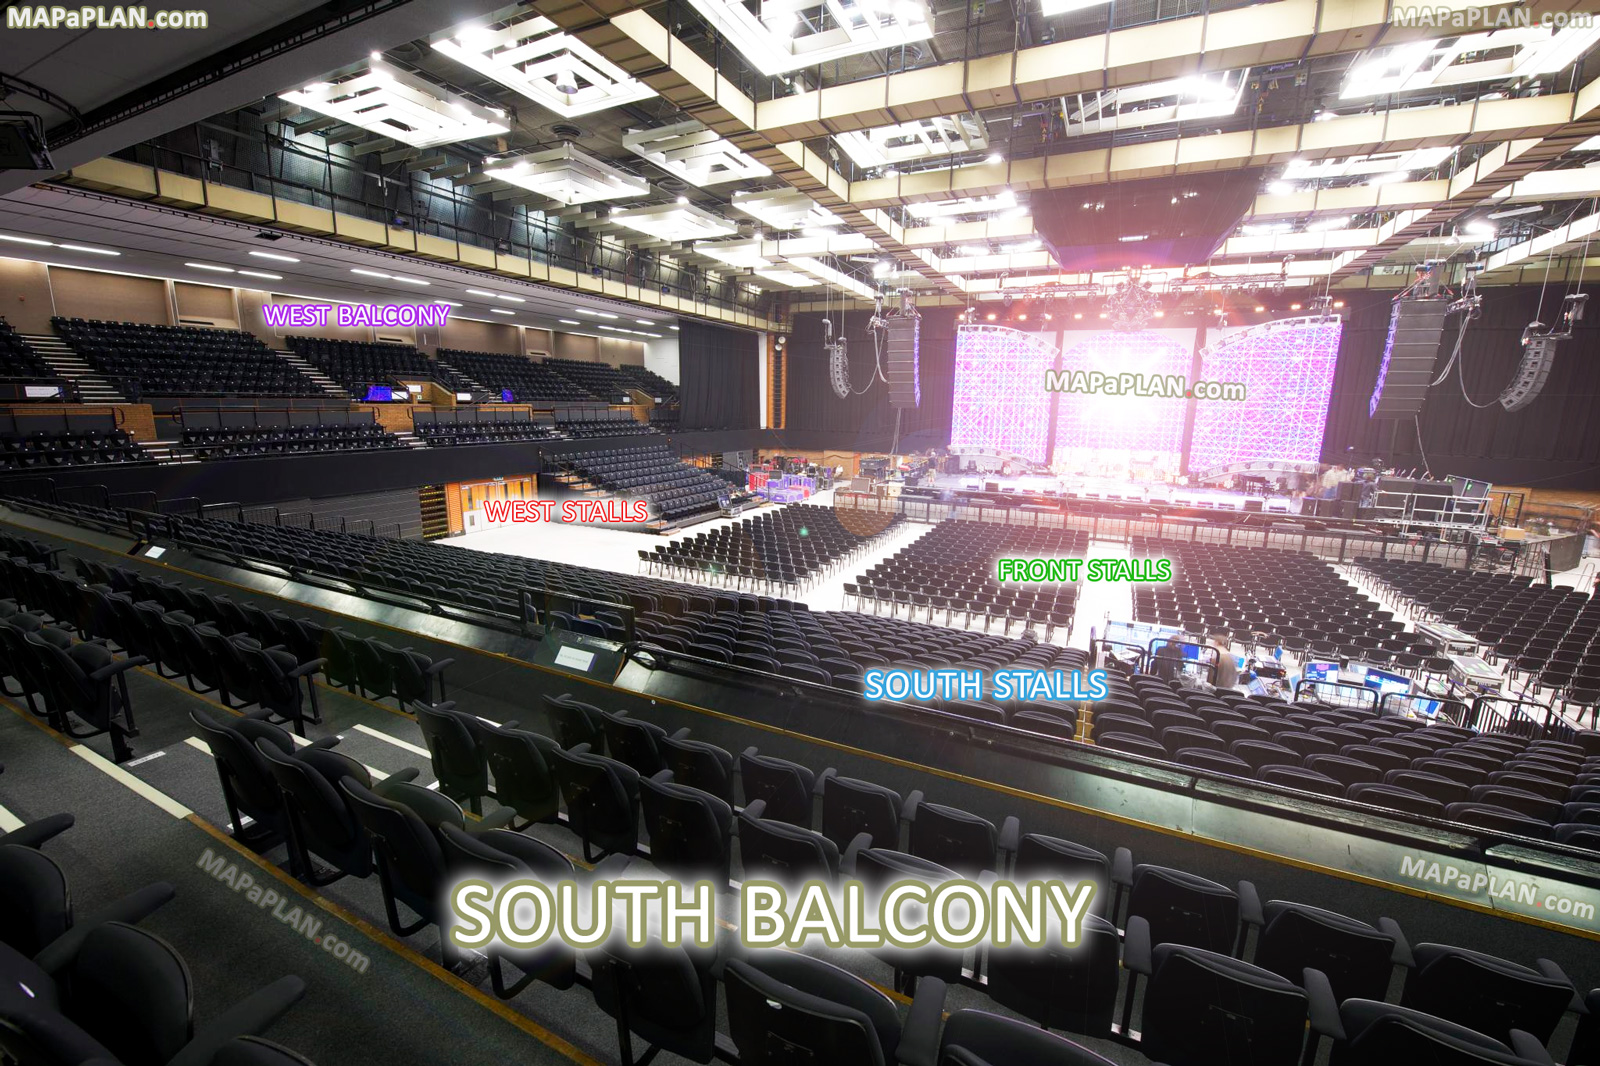 best seats layout view from my seat south balcony row d seat 39 3d virtual interactive map Brighton Centre seating plan